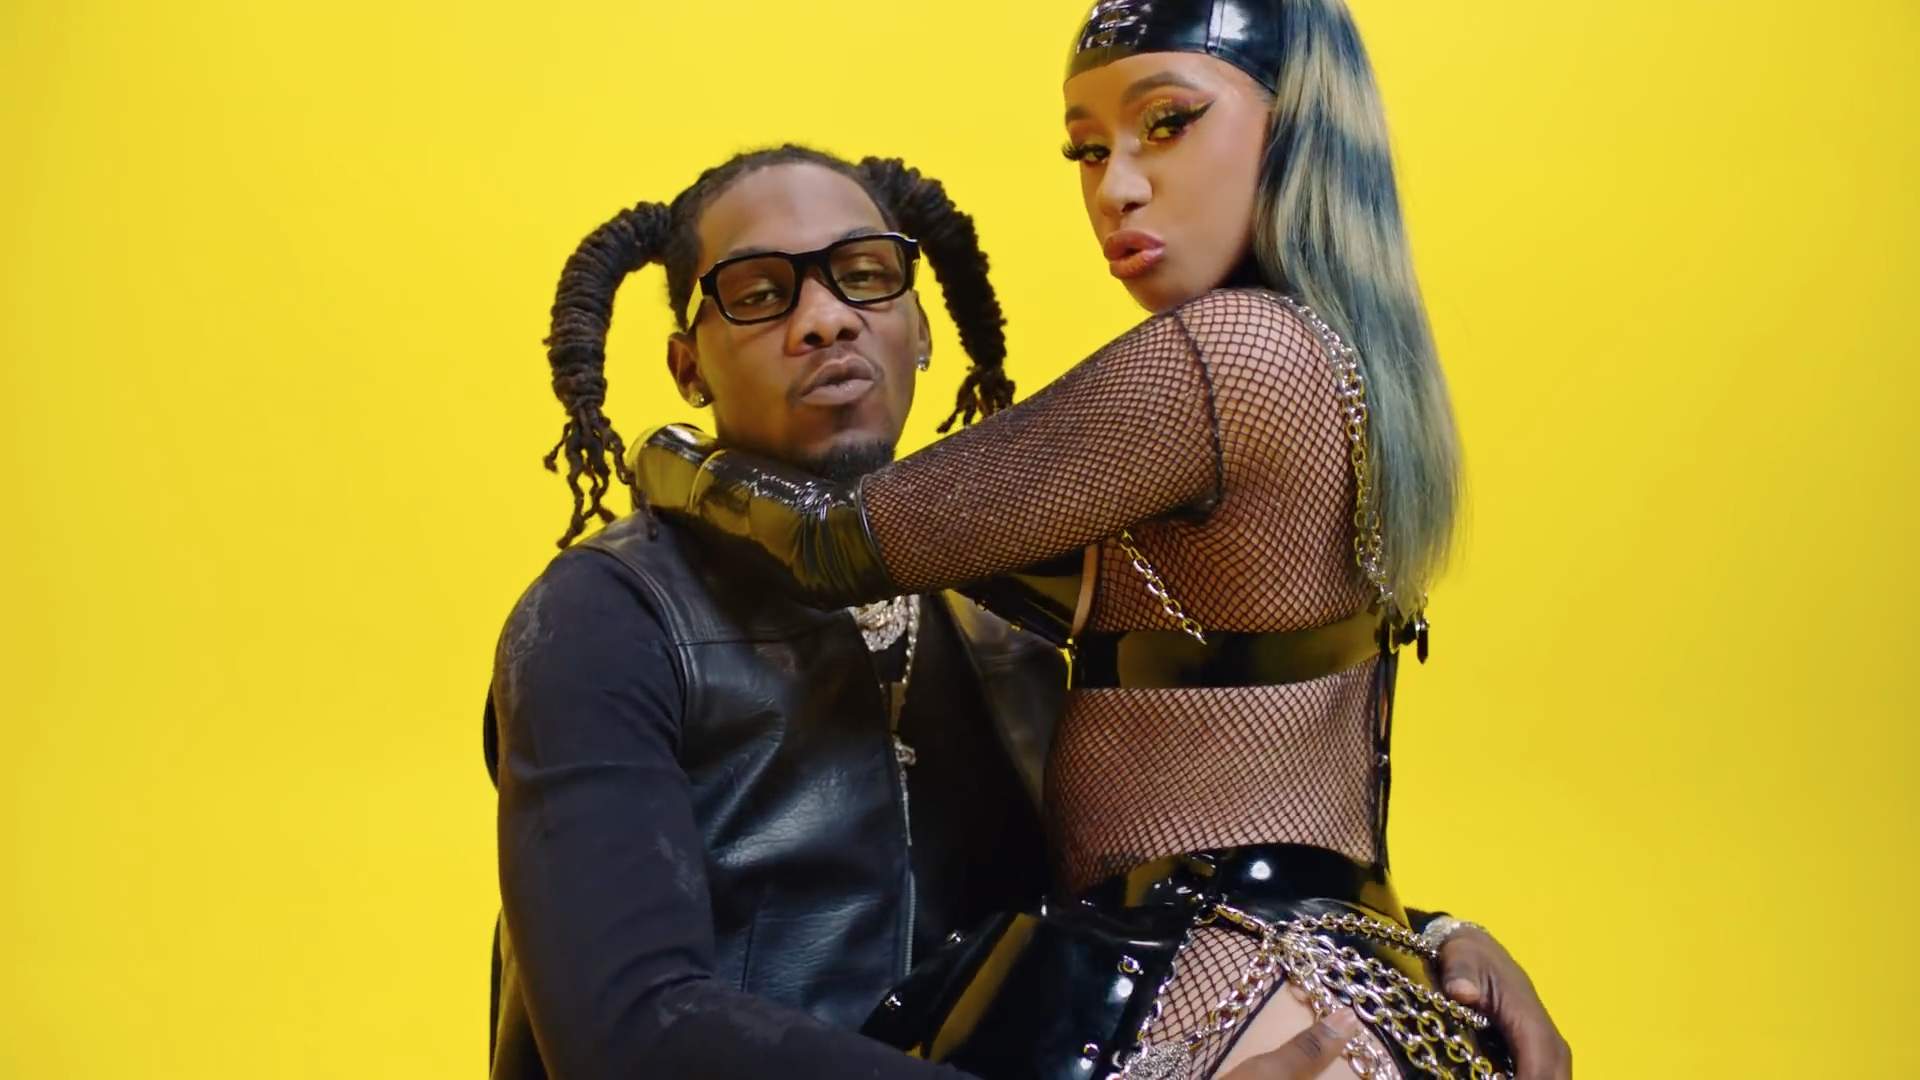 Offset wearing the ENFANTS RICHES DÉPRIMÉS x THIERRY LASRY "THE ISOLAR 2" in "Clout" music video